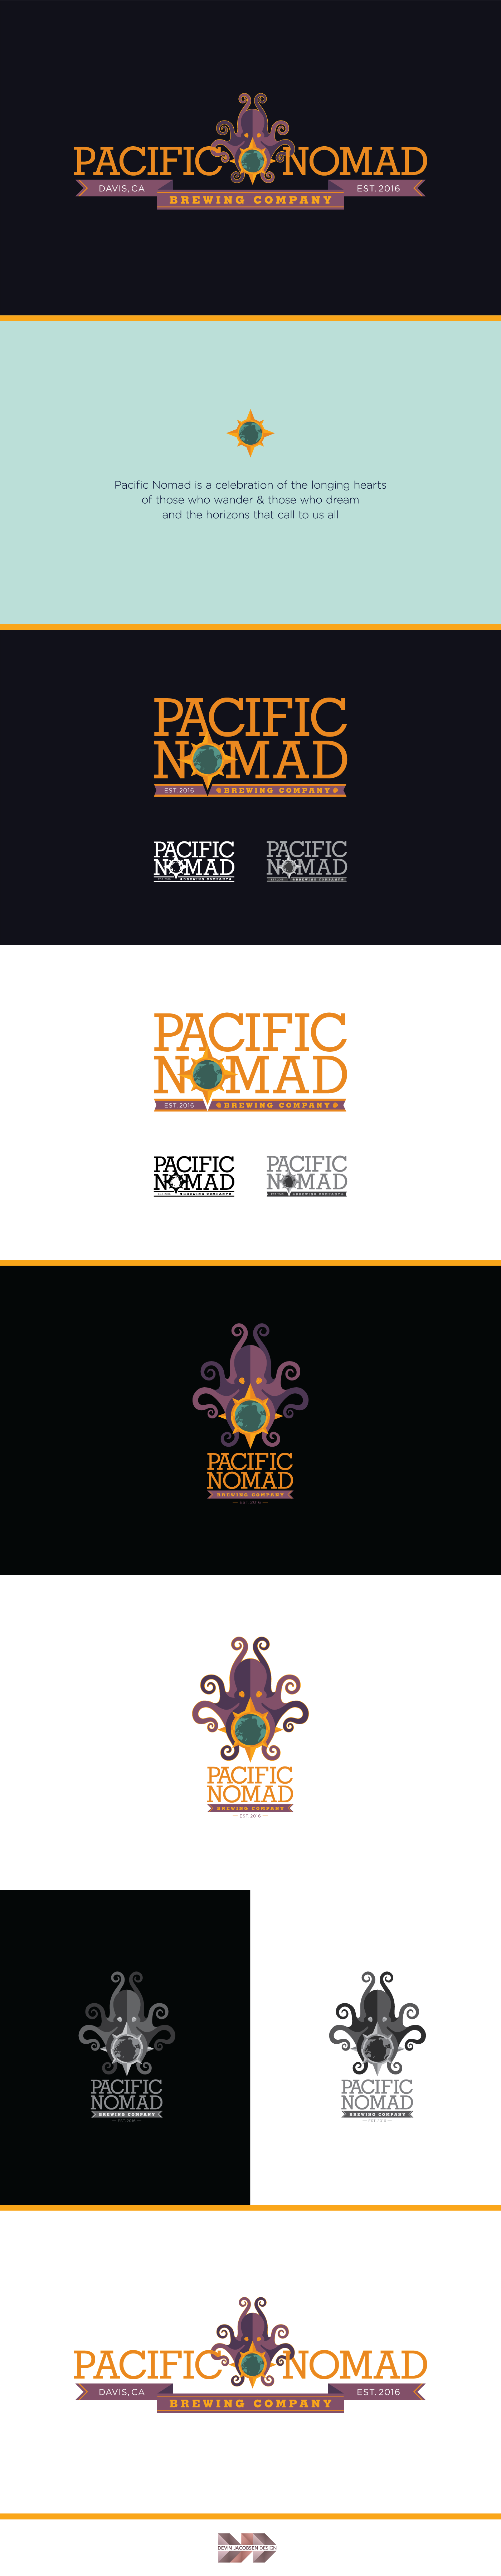 Logo for Pacific Nomad Brewing Company